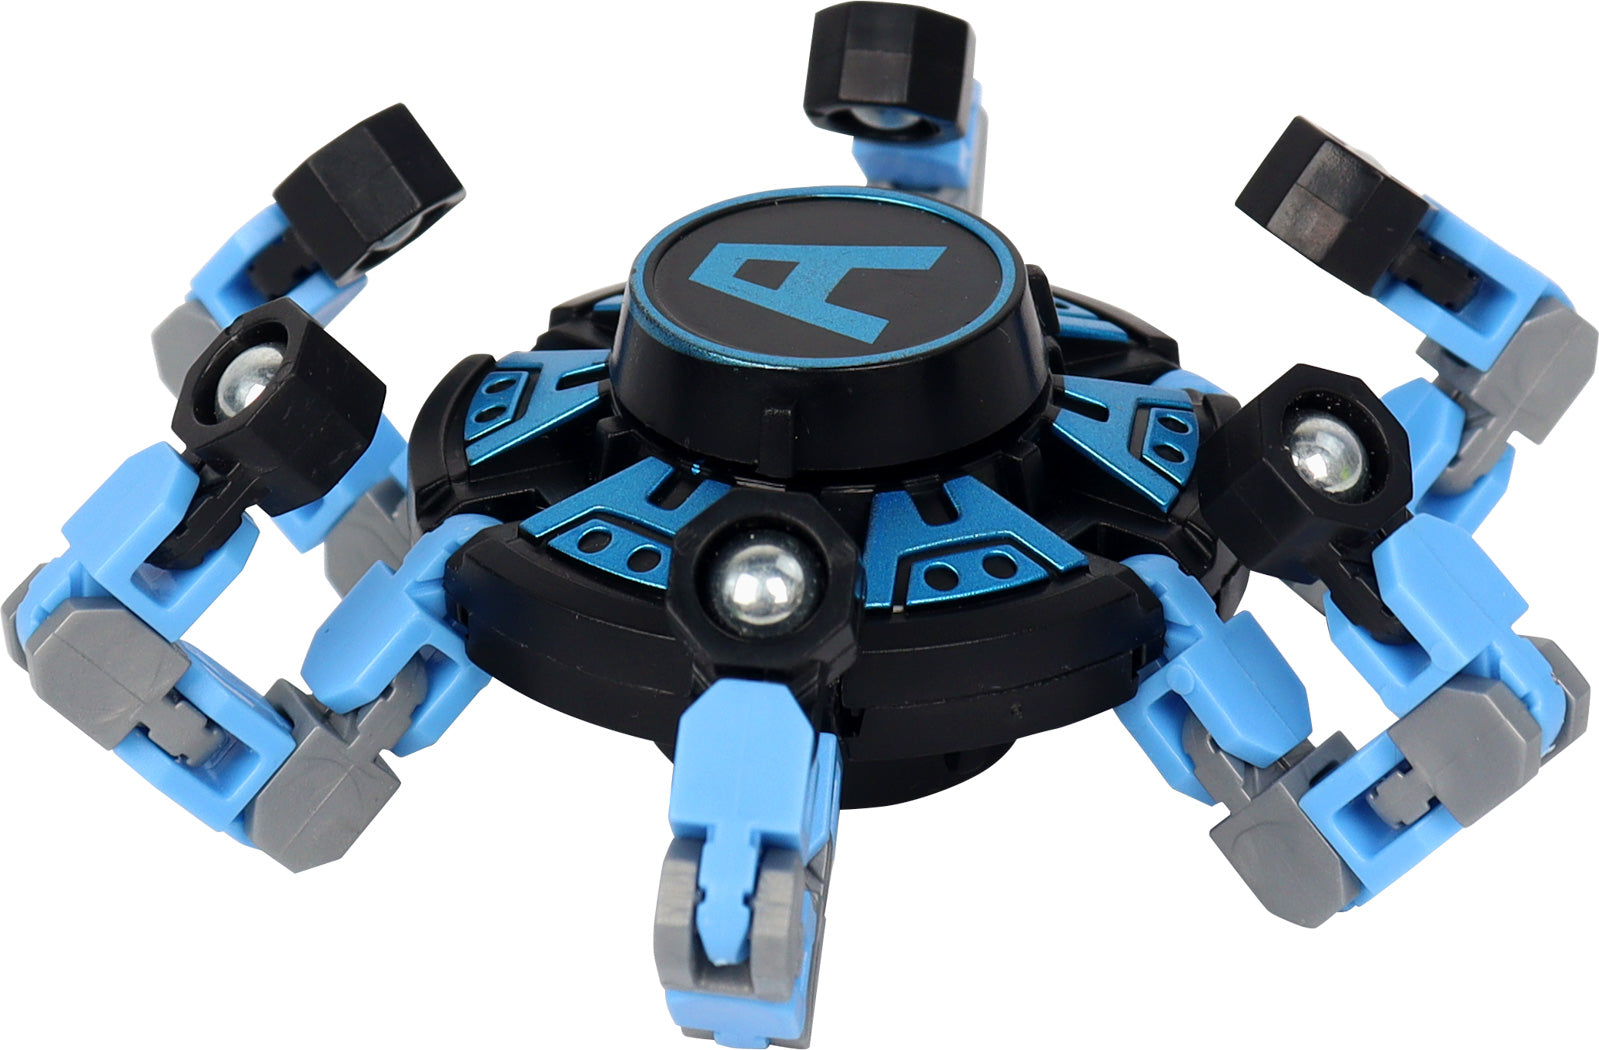 MINISO TRANSFORMABLE SPINNER(BLUE) 2012148912105 TRANSFORMATION TOYS